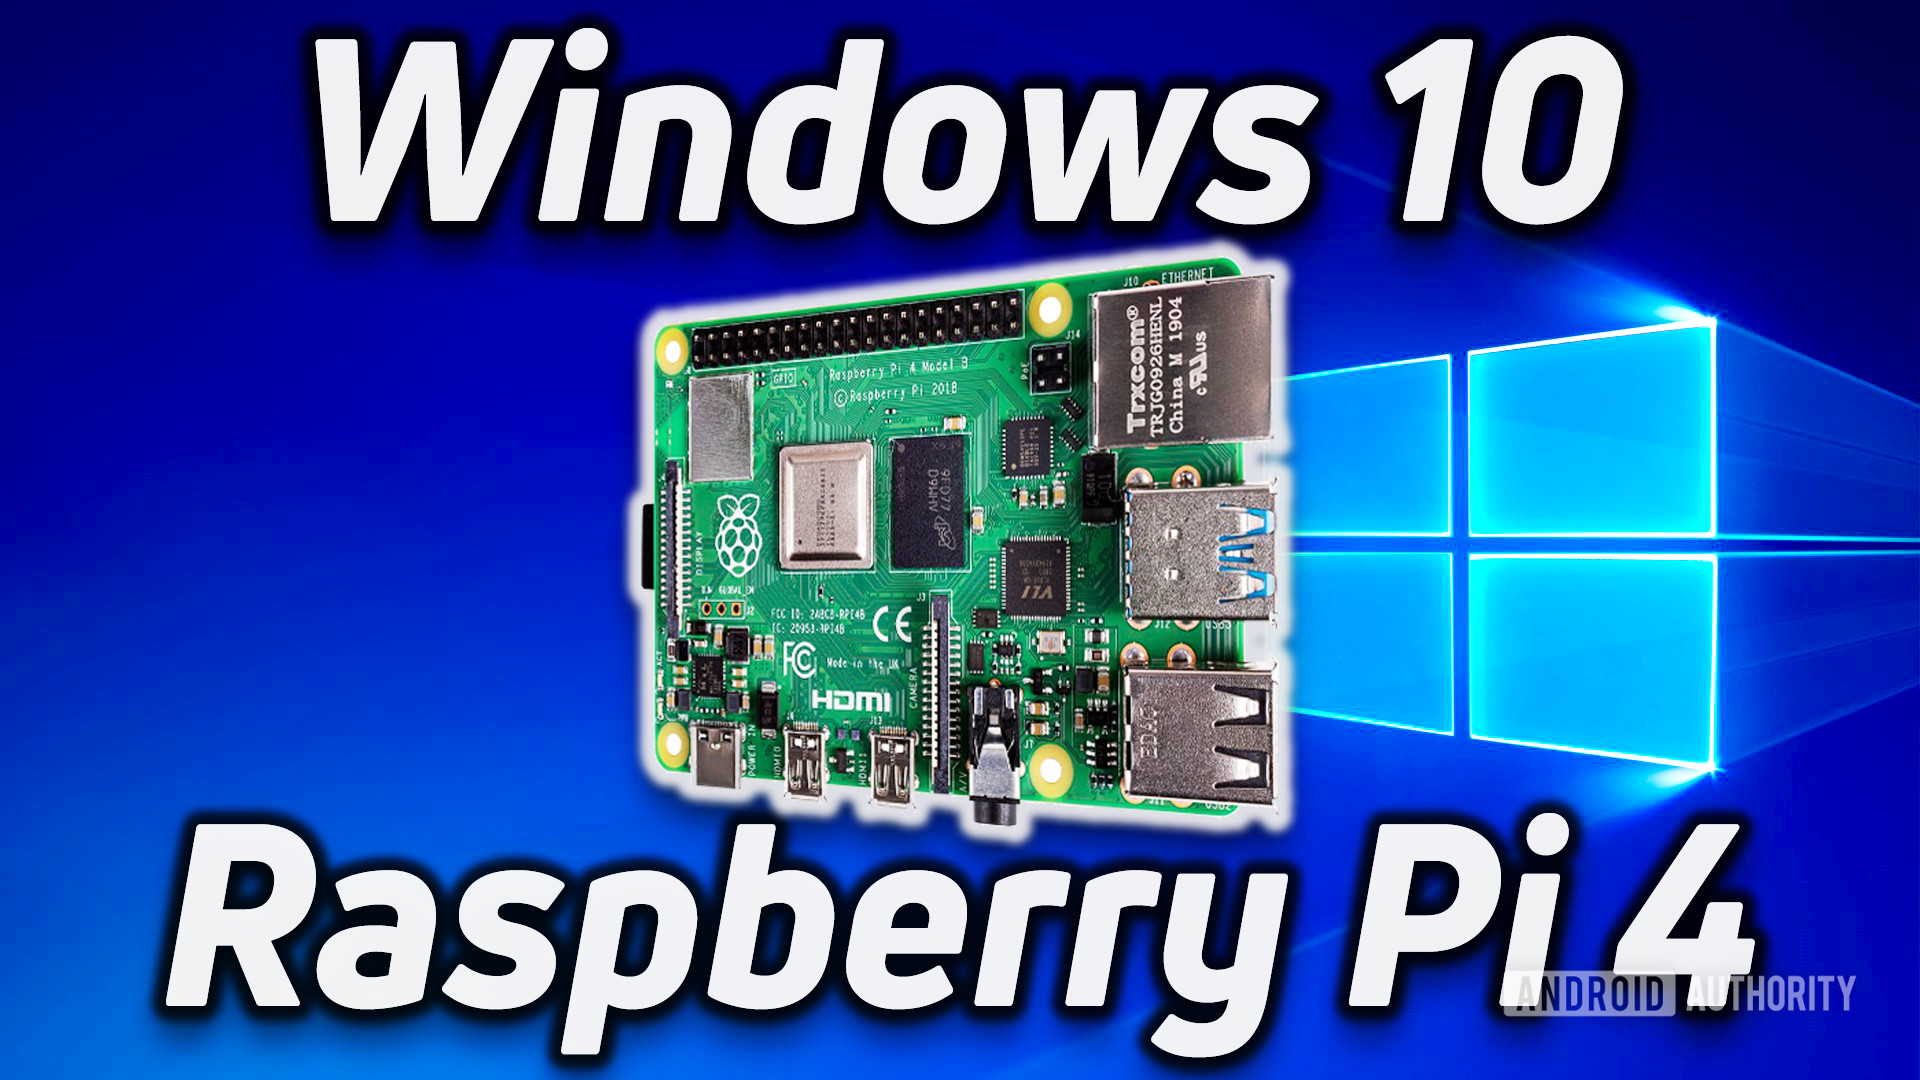 Windows 10 on the Raspberry Pi 4 feature image